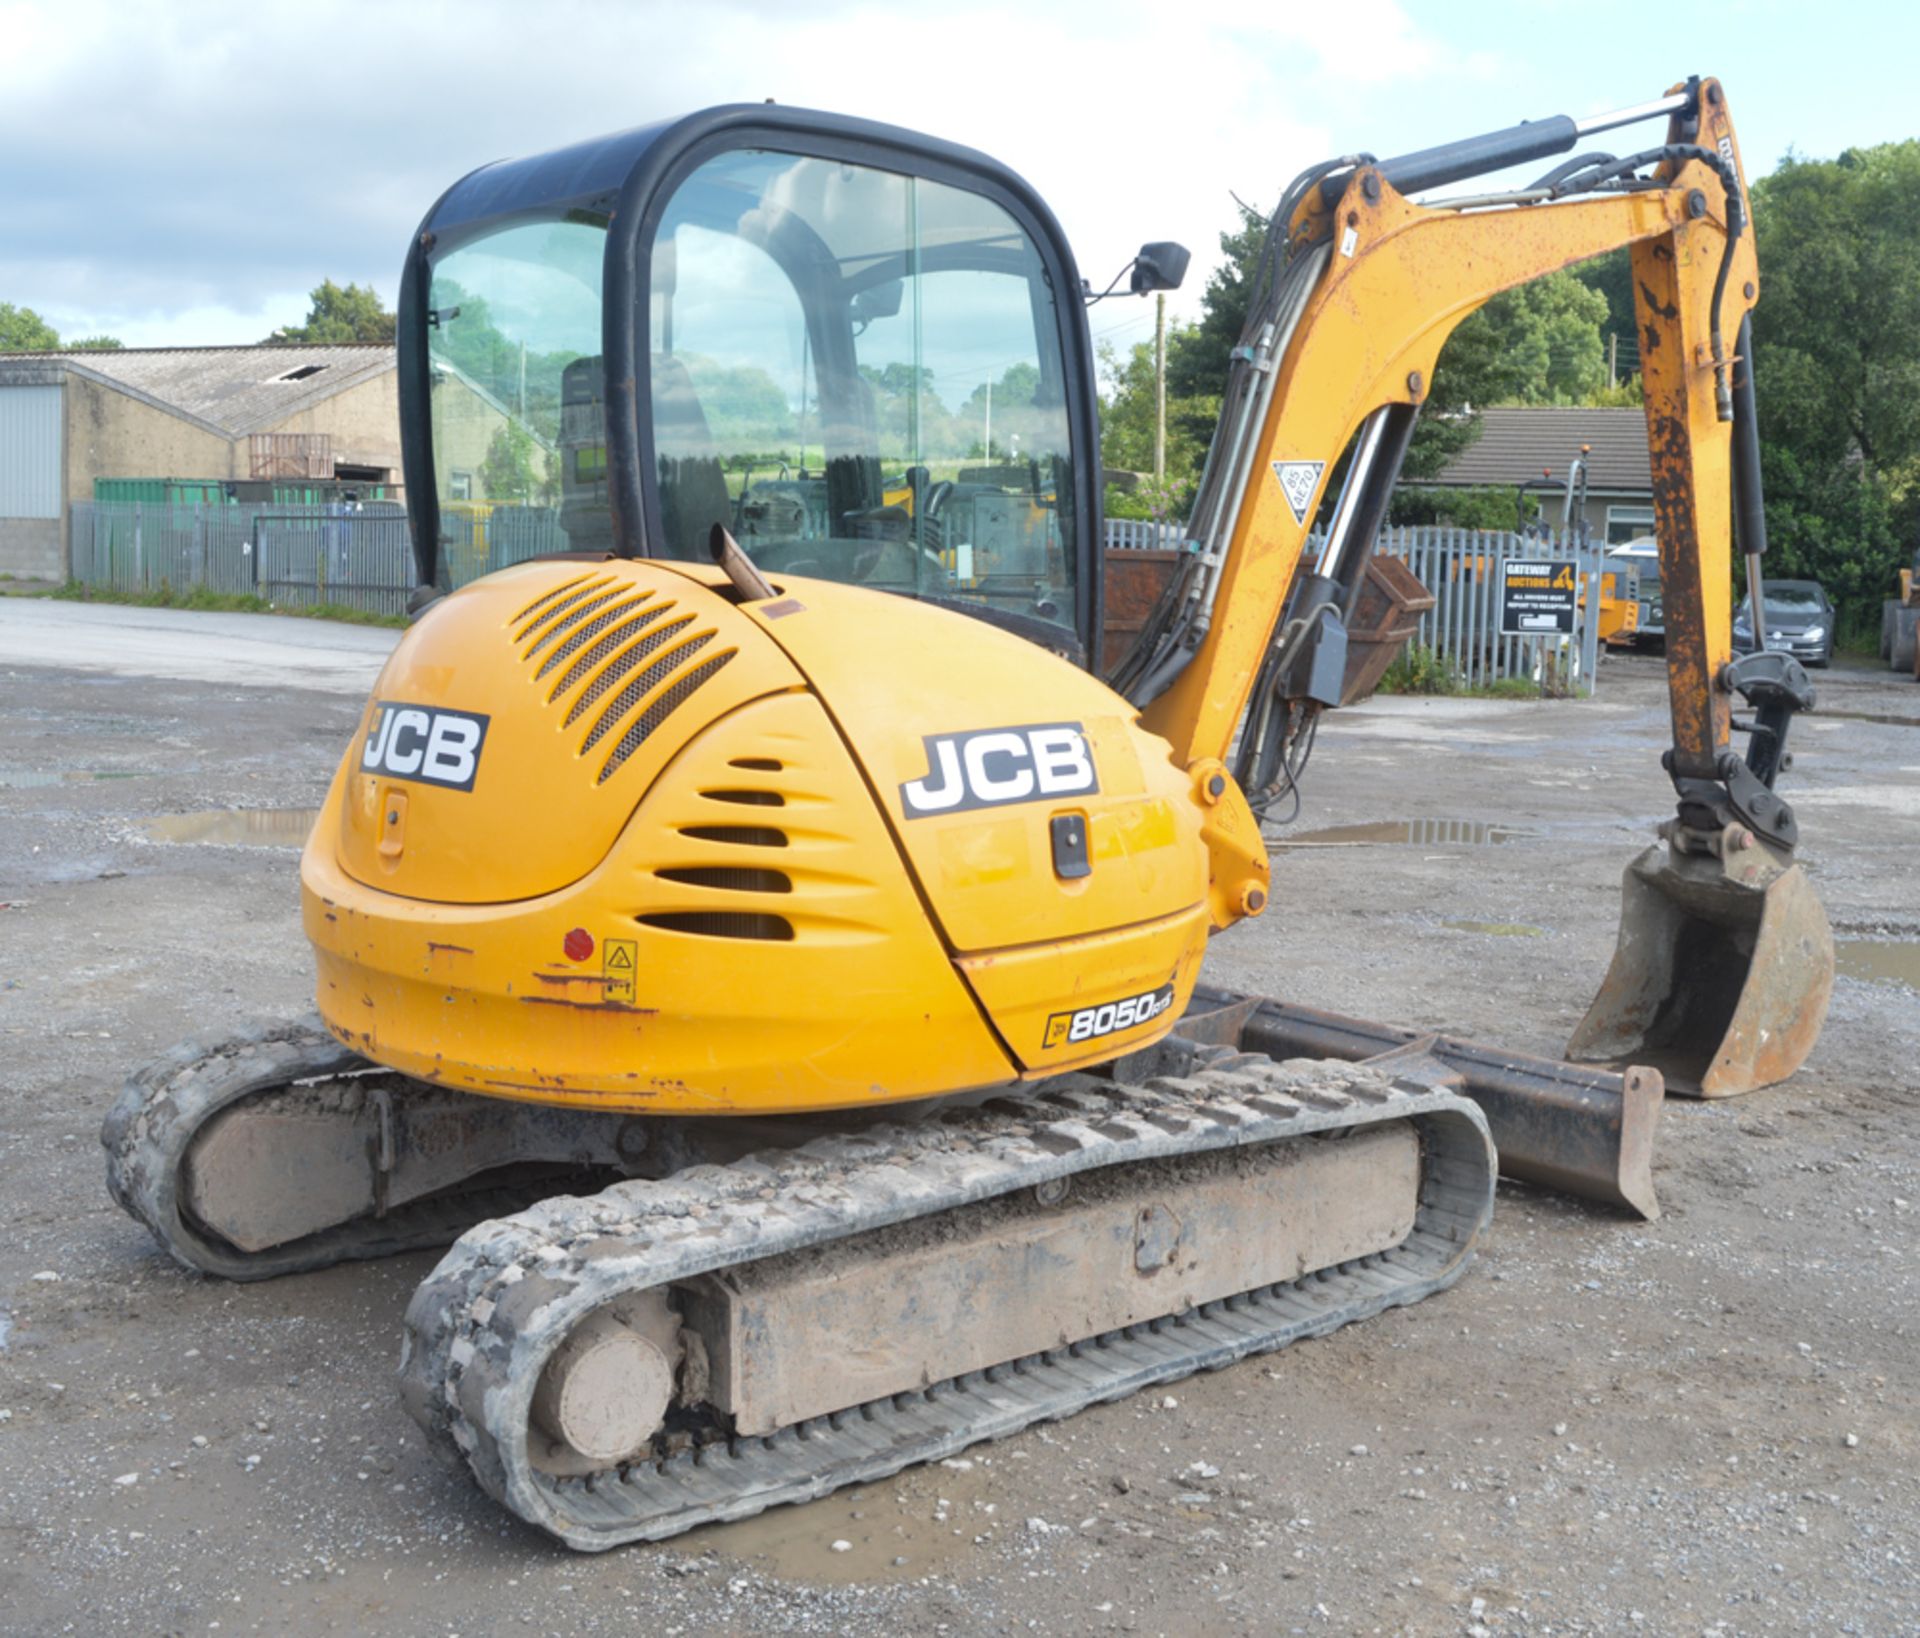 JCB 8050 RTS 5 tonne rubber tracked excavator  Year: 2011 S/N: 01741645 Recorded hours: 2052 - Bild 3 aus 11